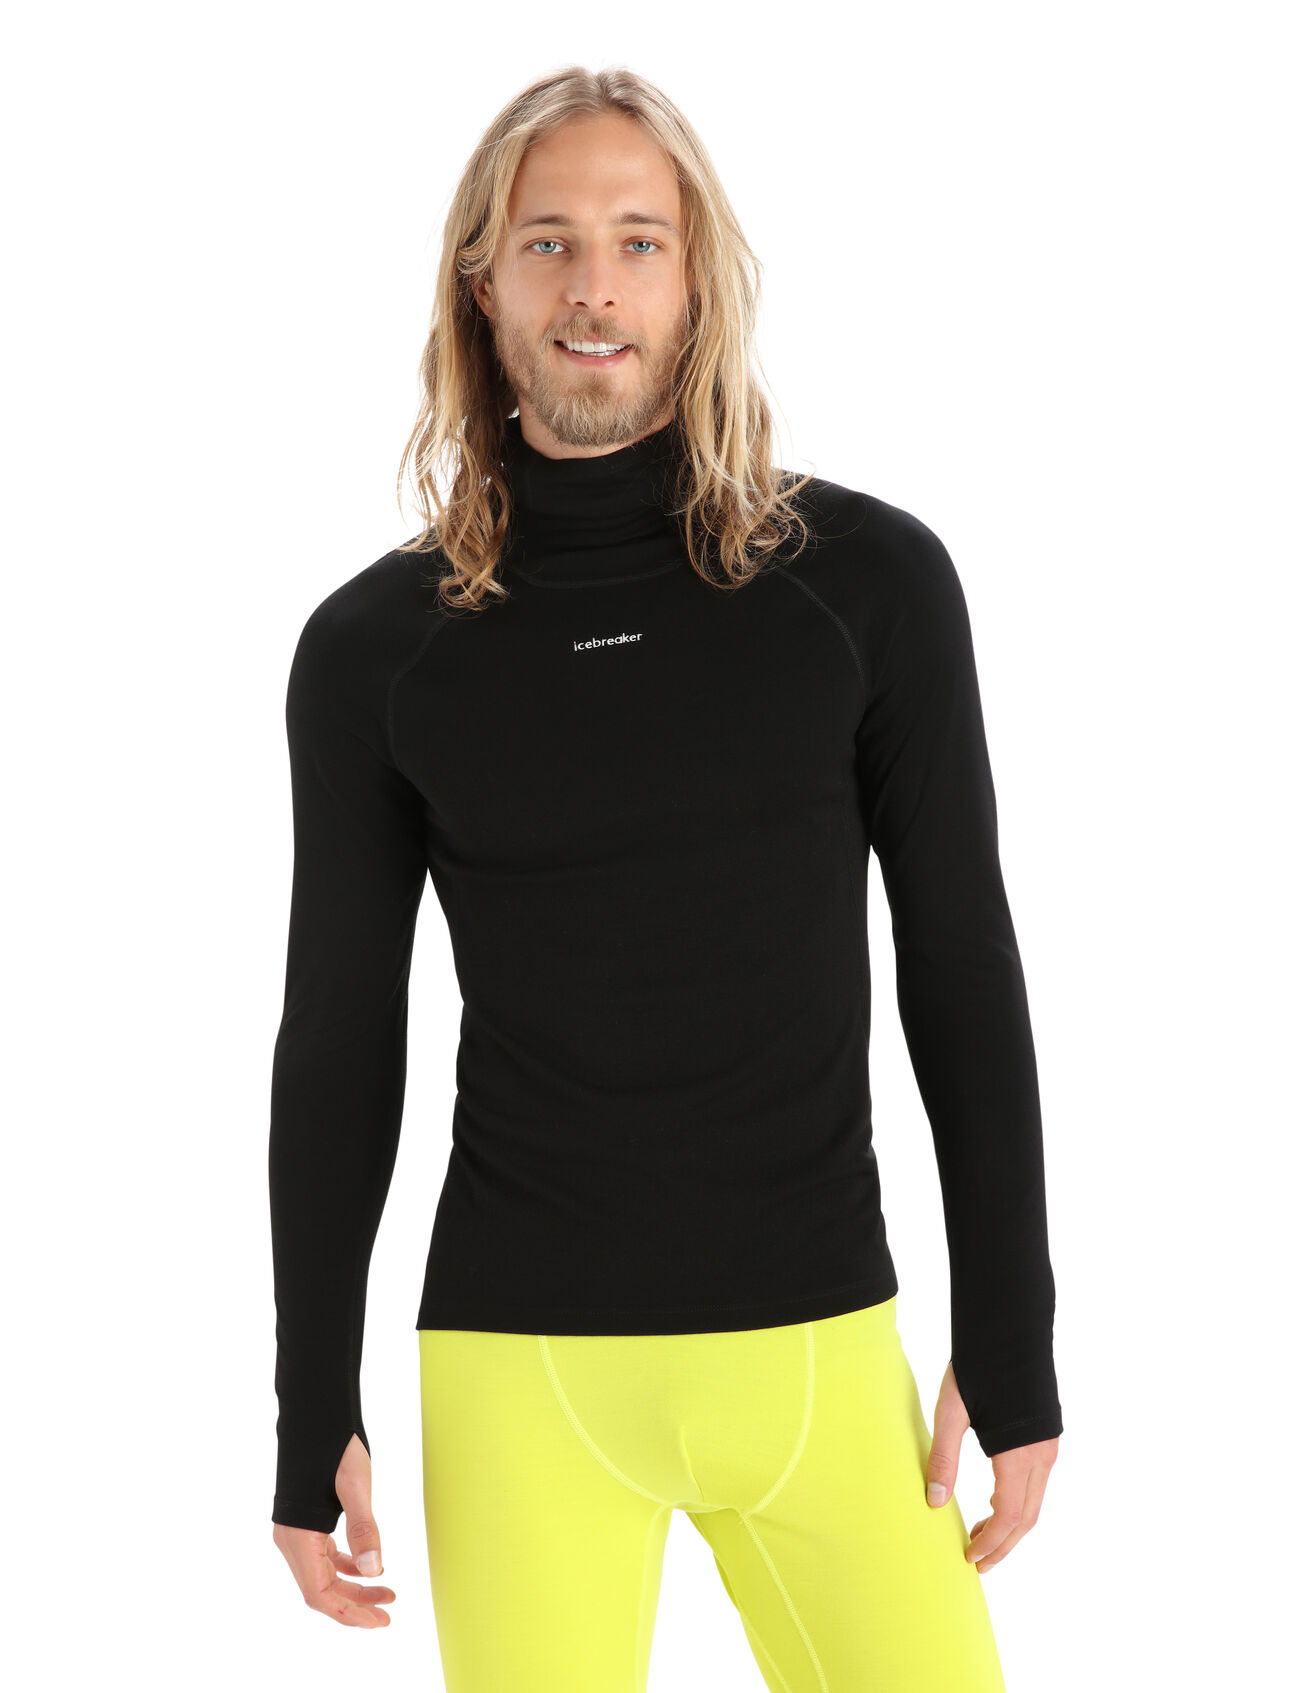 Mens MerinoFine™ Long Sleeve Roll Neck A premium, slim-fit base layer made with luxuriously soft 15.5 micron merino wool fibers and a high-neck design for added protection, the MerinoFine™ Long Sleeve Roll Neck is at the intersection of comfort and performance.